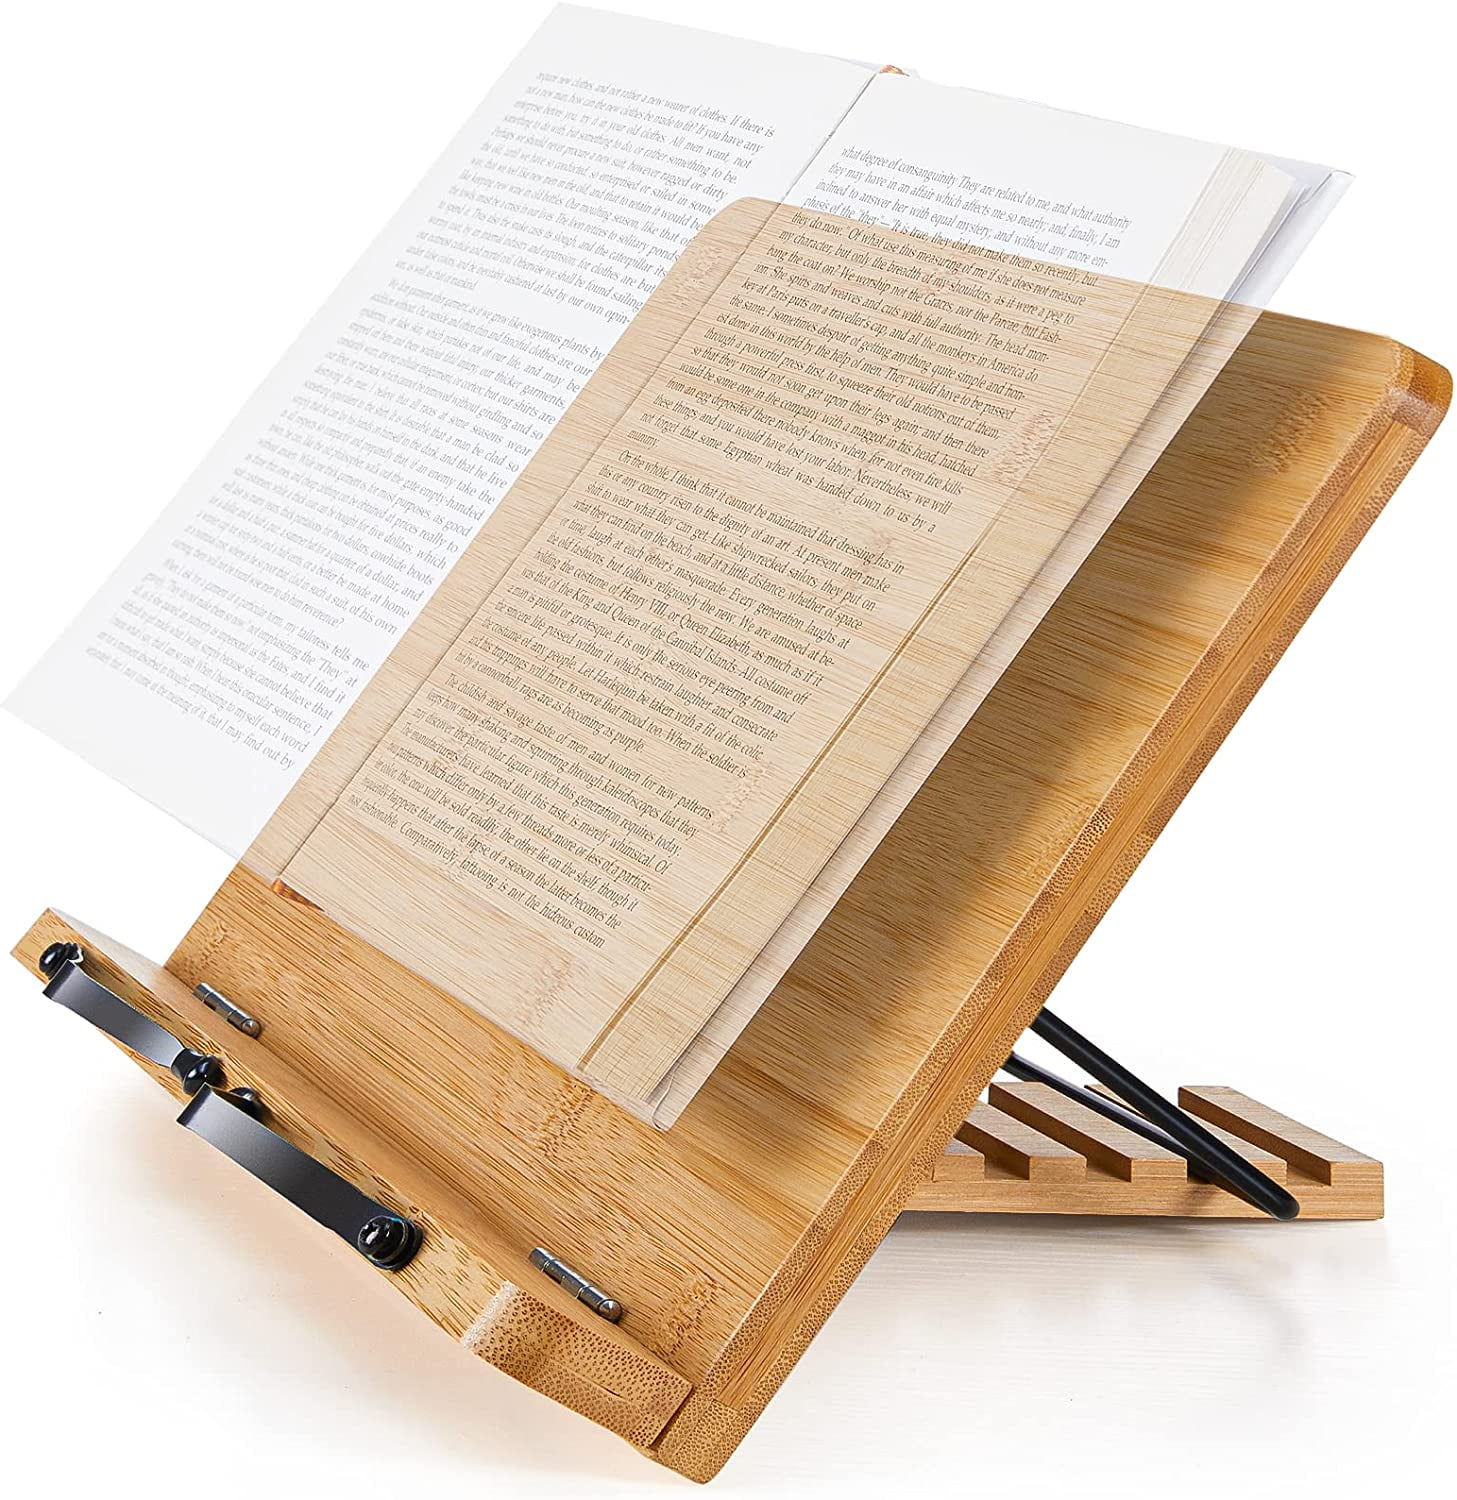 Myfurnideal Bamboo Book Stand Foldable Reading Book Holder Cookbook